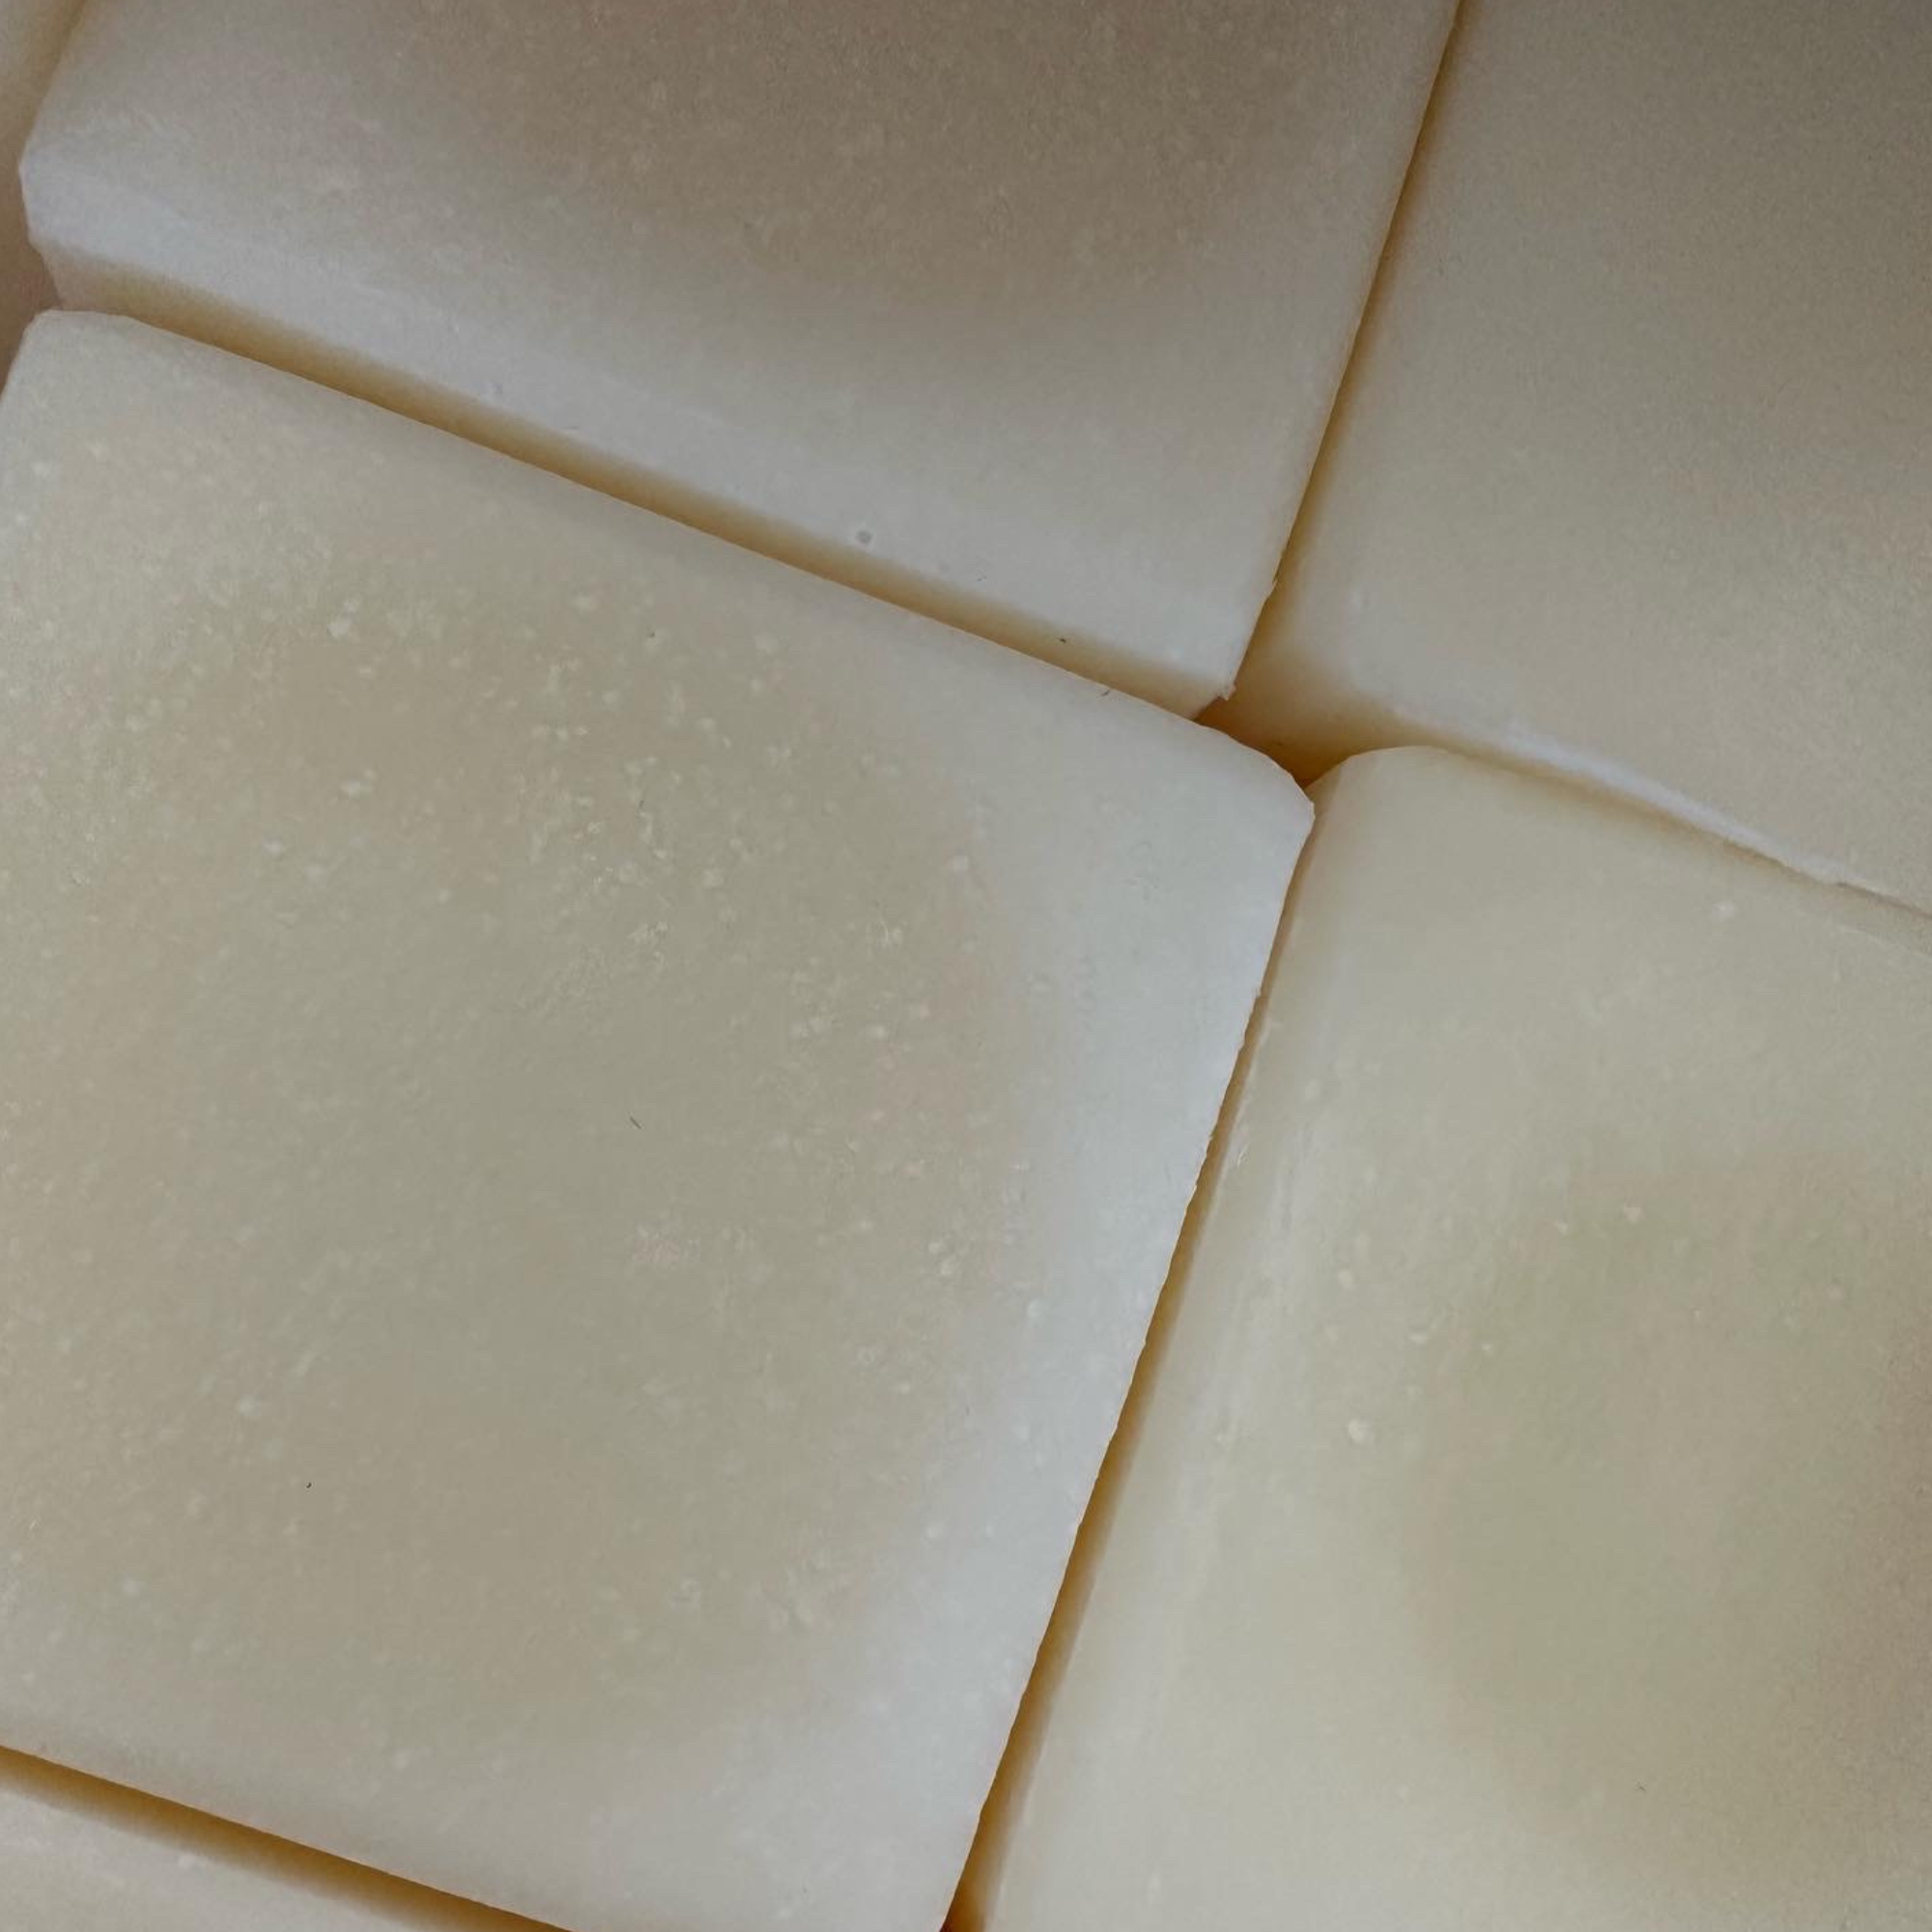 Close-up of several stacked bars of Tallow Me Pretty unscented tallow soap, showcasing their uniform ivory color and subtly speckled texture, evoking a sense of pure, clean simplicity.